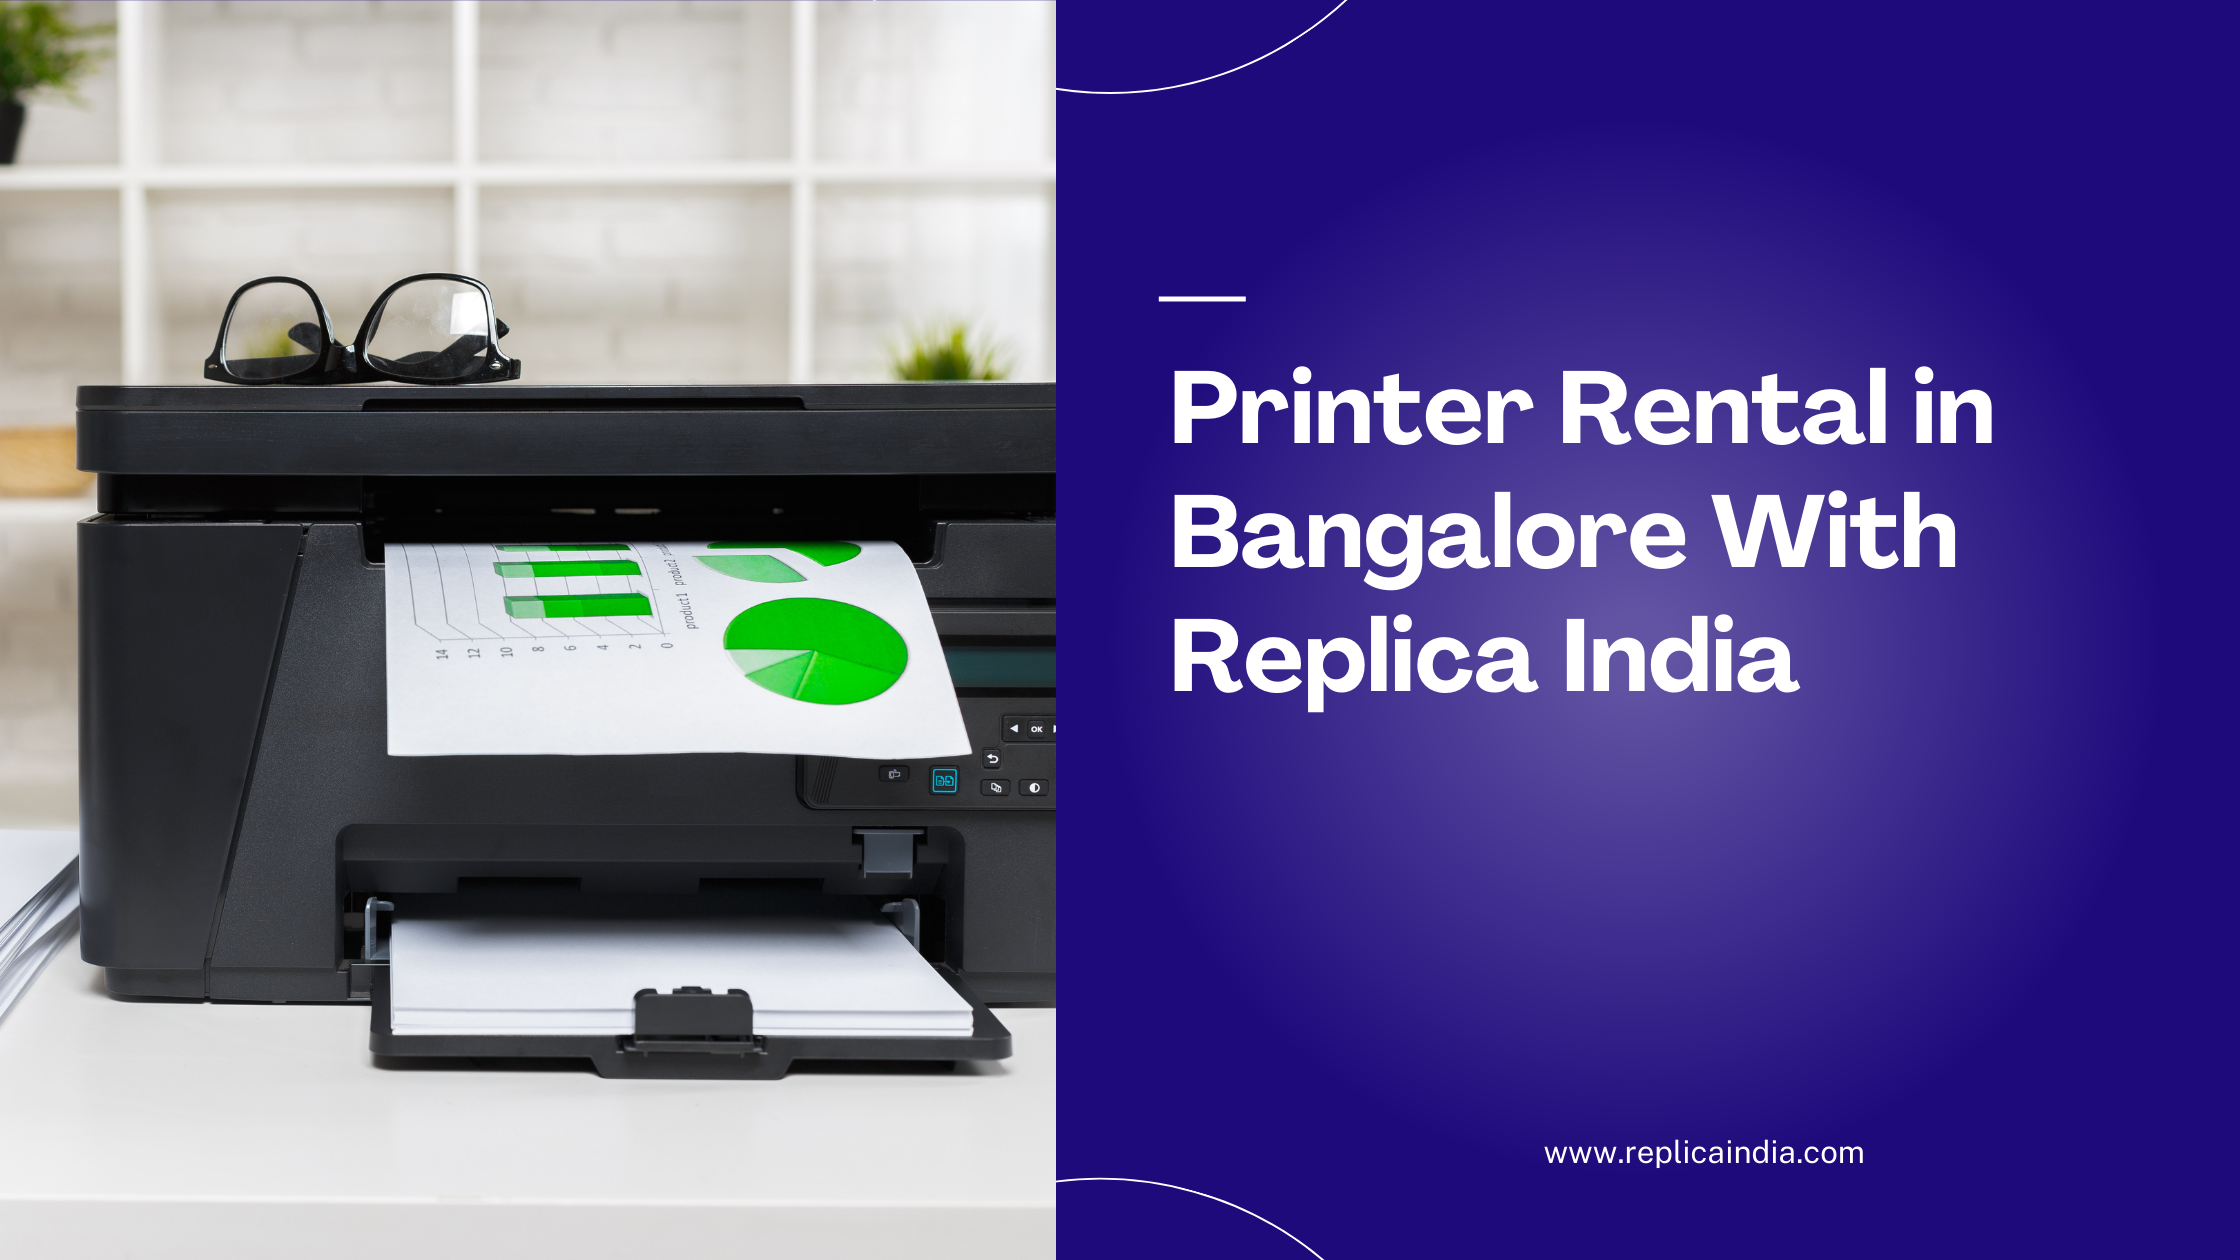 Printer Rental in Bangalore – Simplify your printing needs with our services.